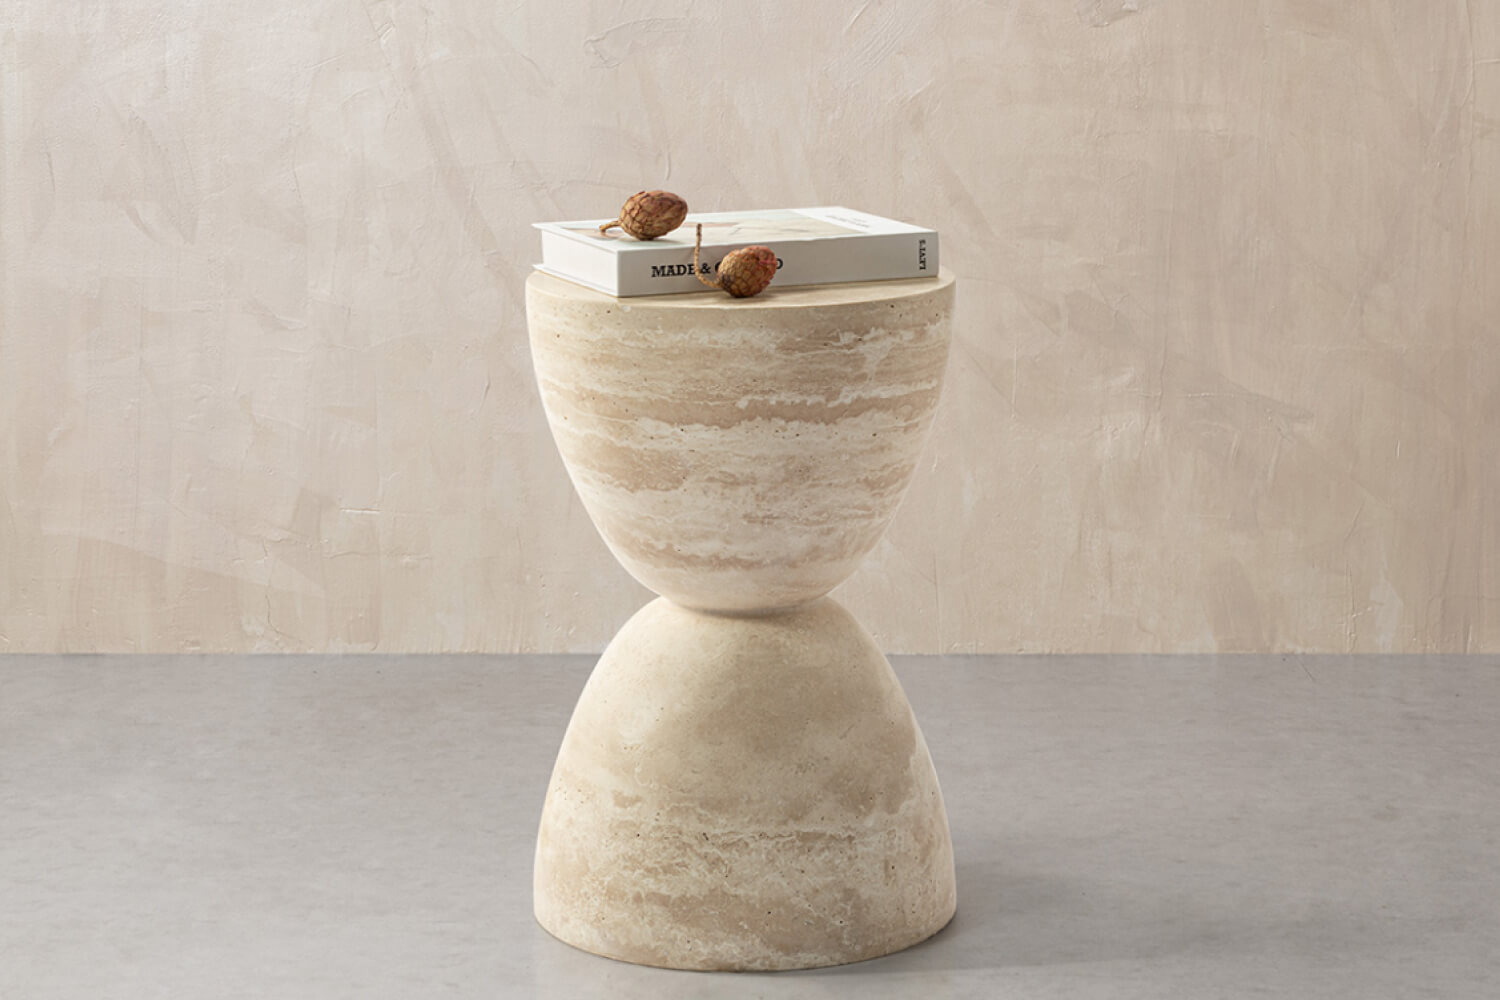 The Sera Hourglass White Travertine Side Table showcases a natural stone finish with layered textures, topped with a book and decorative items.